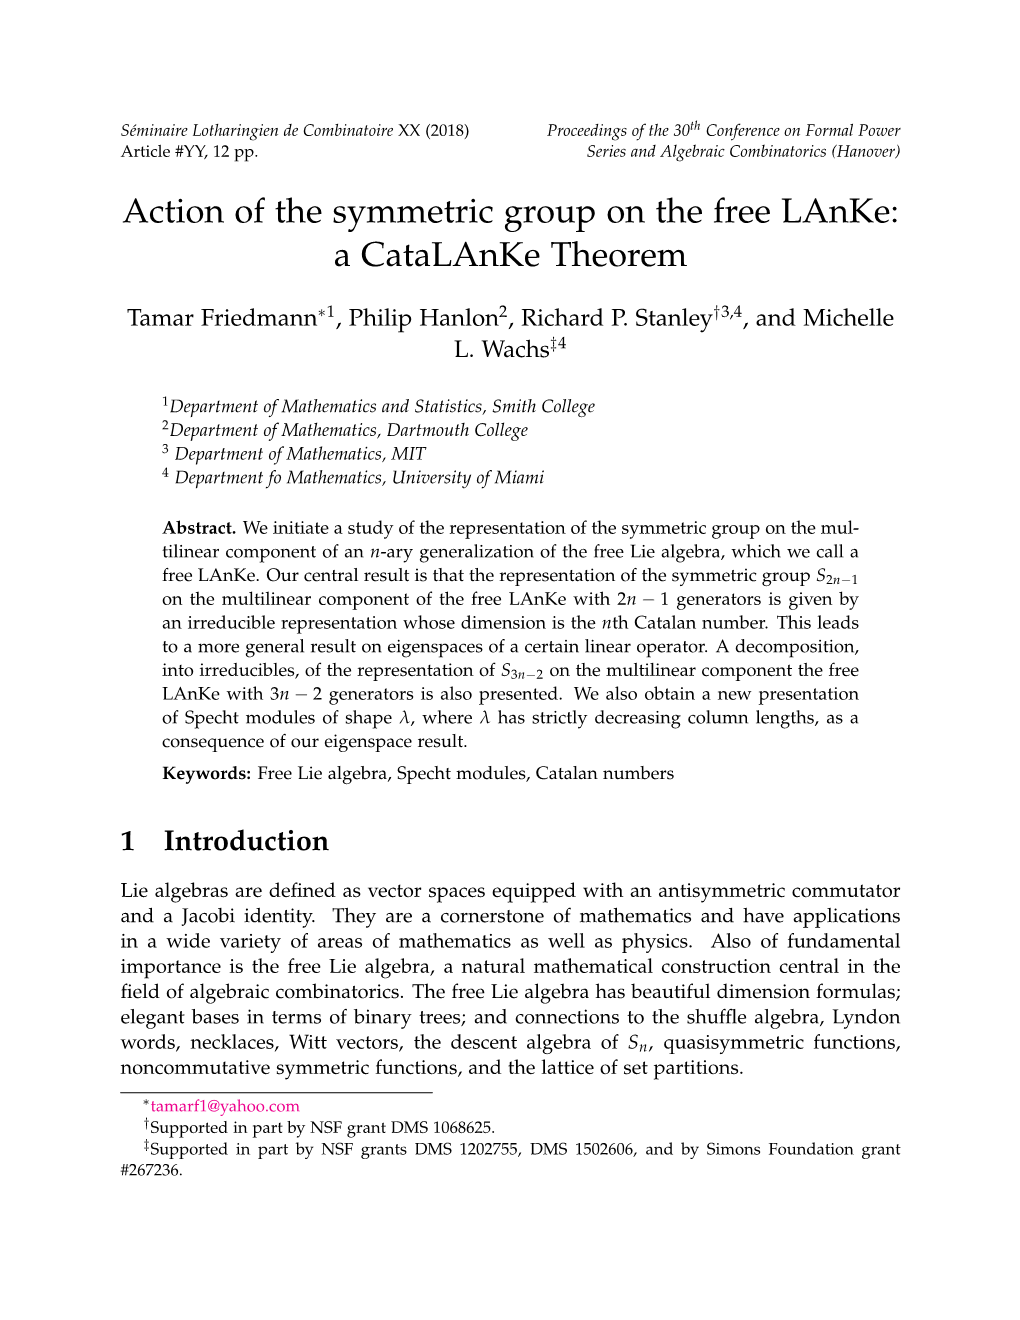 Action of the Symmetric Group on the Free Lanke: a Catalanke Theorem